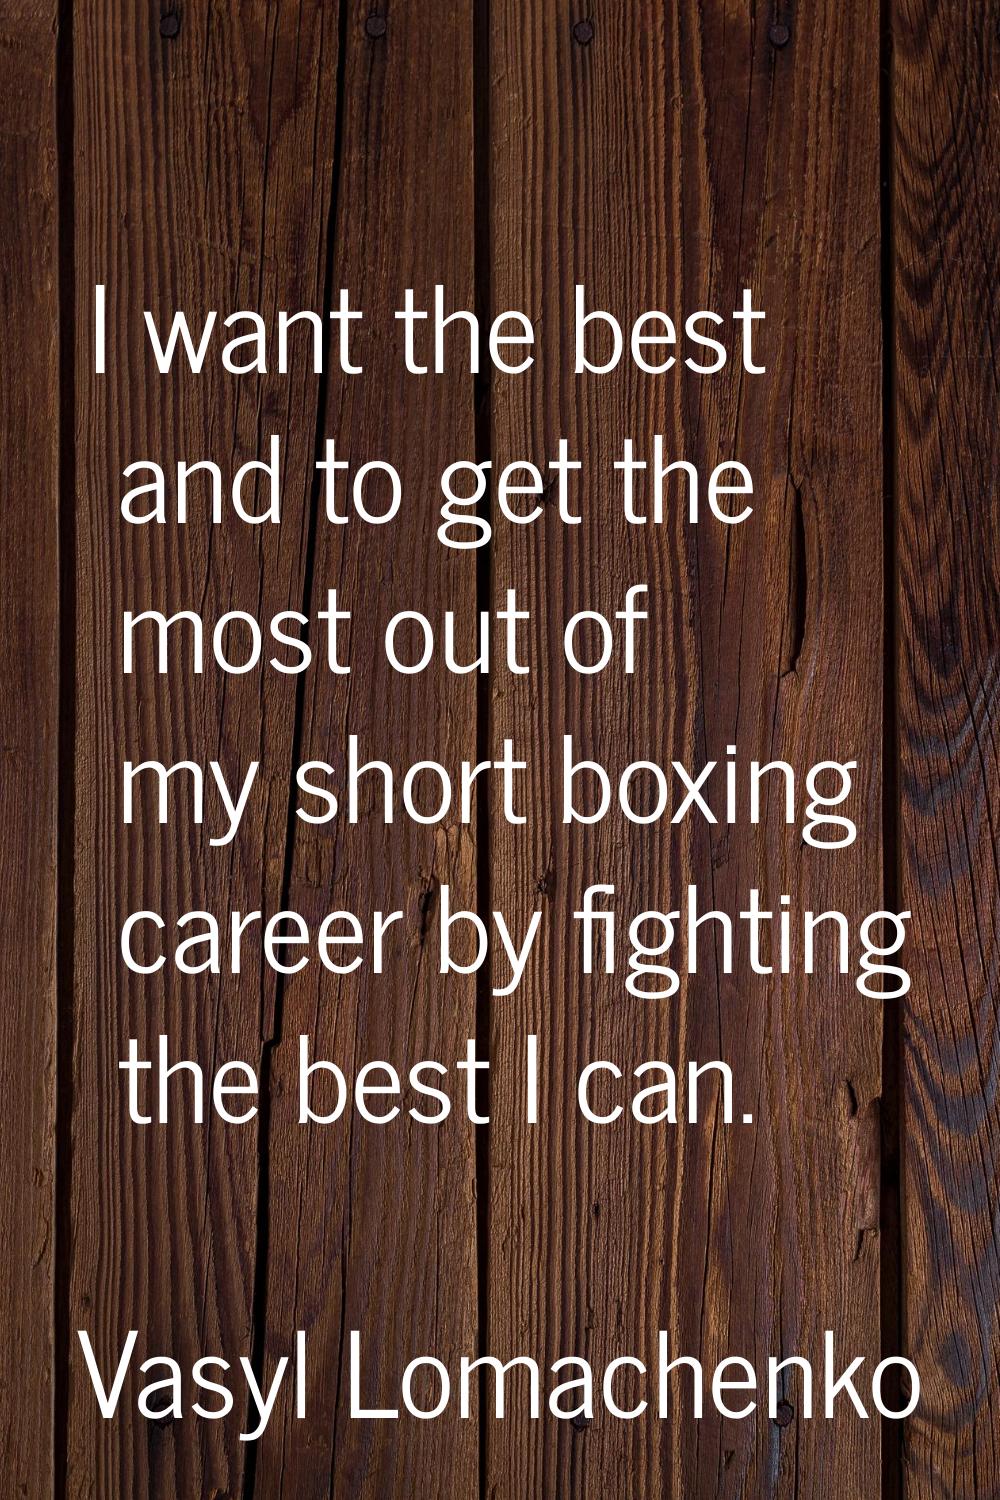 I want the best and to get the most out of my short boxing career by fighting the best I can.